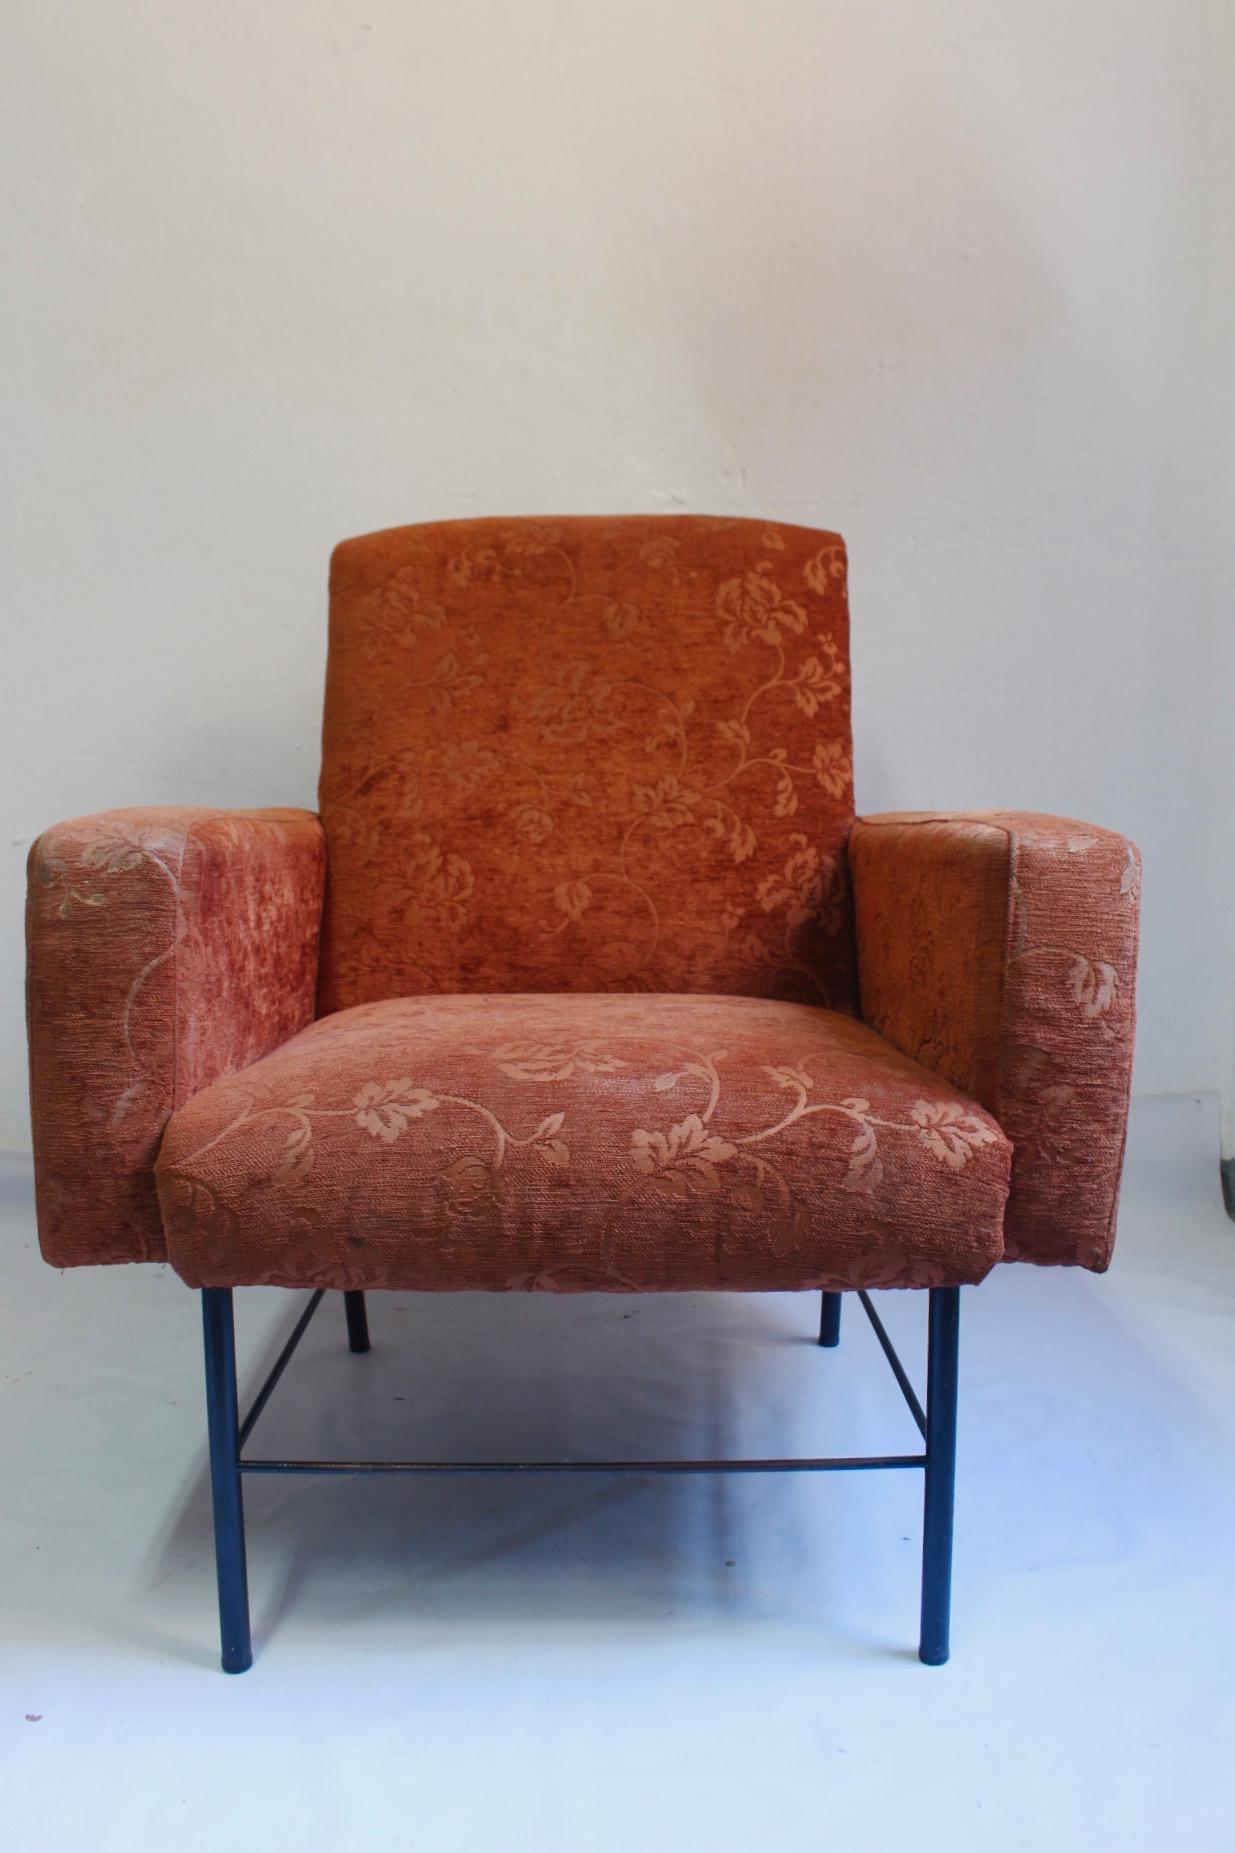   Midcentury Rationalist Living Room Lounge Armchair Set with Metal Legs, 1960s im Zustand „Relativ gut“ im Angebot in Valencia, Valencia